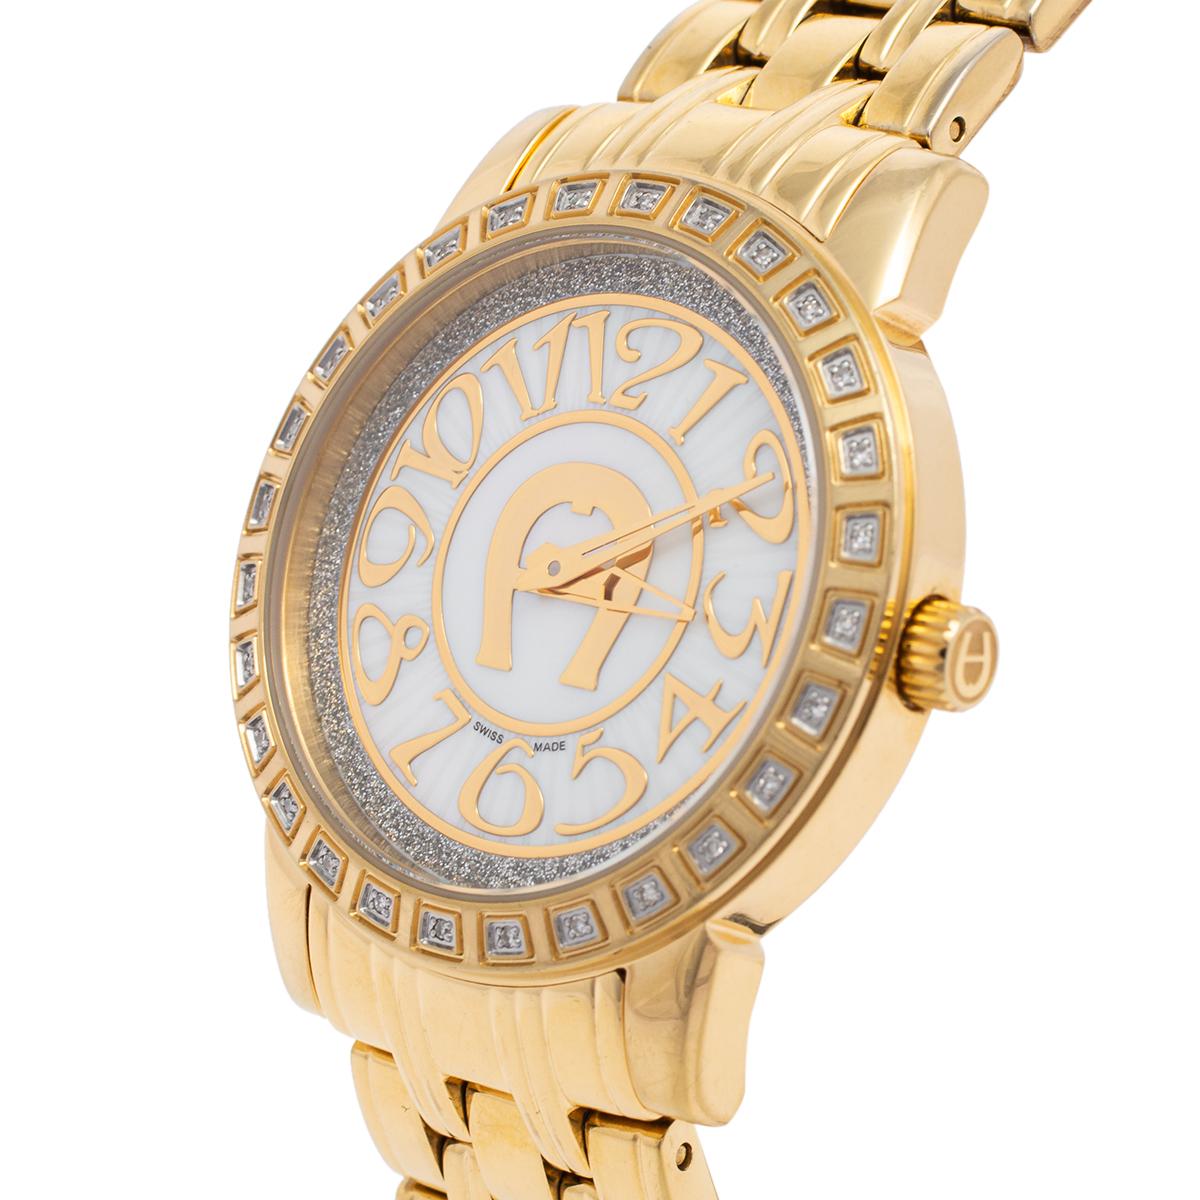 Aigner is considered the first voguish brand for stylish living from Germany. This gold-plated stainless steel women's wristwatch by Aigner is a fashionable example of the aforementioned. The watch features a fancy round bezel with embellishments